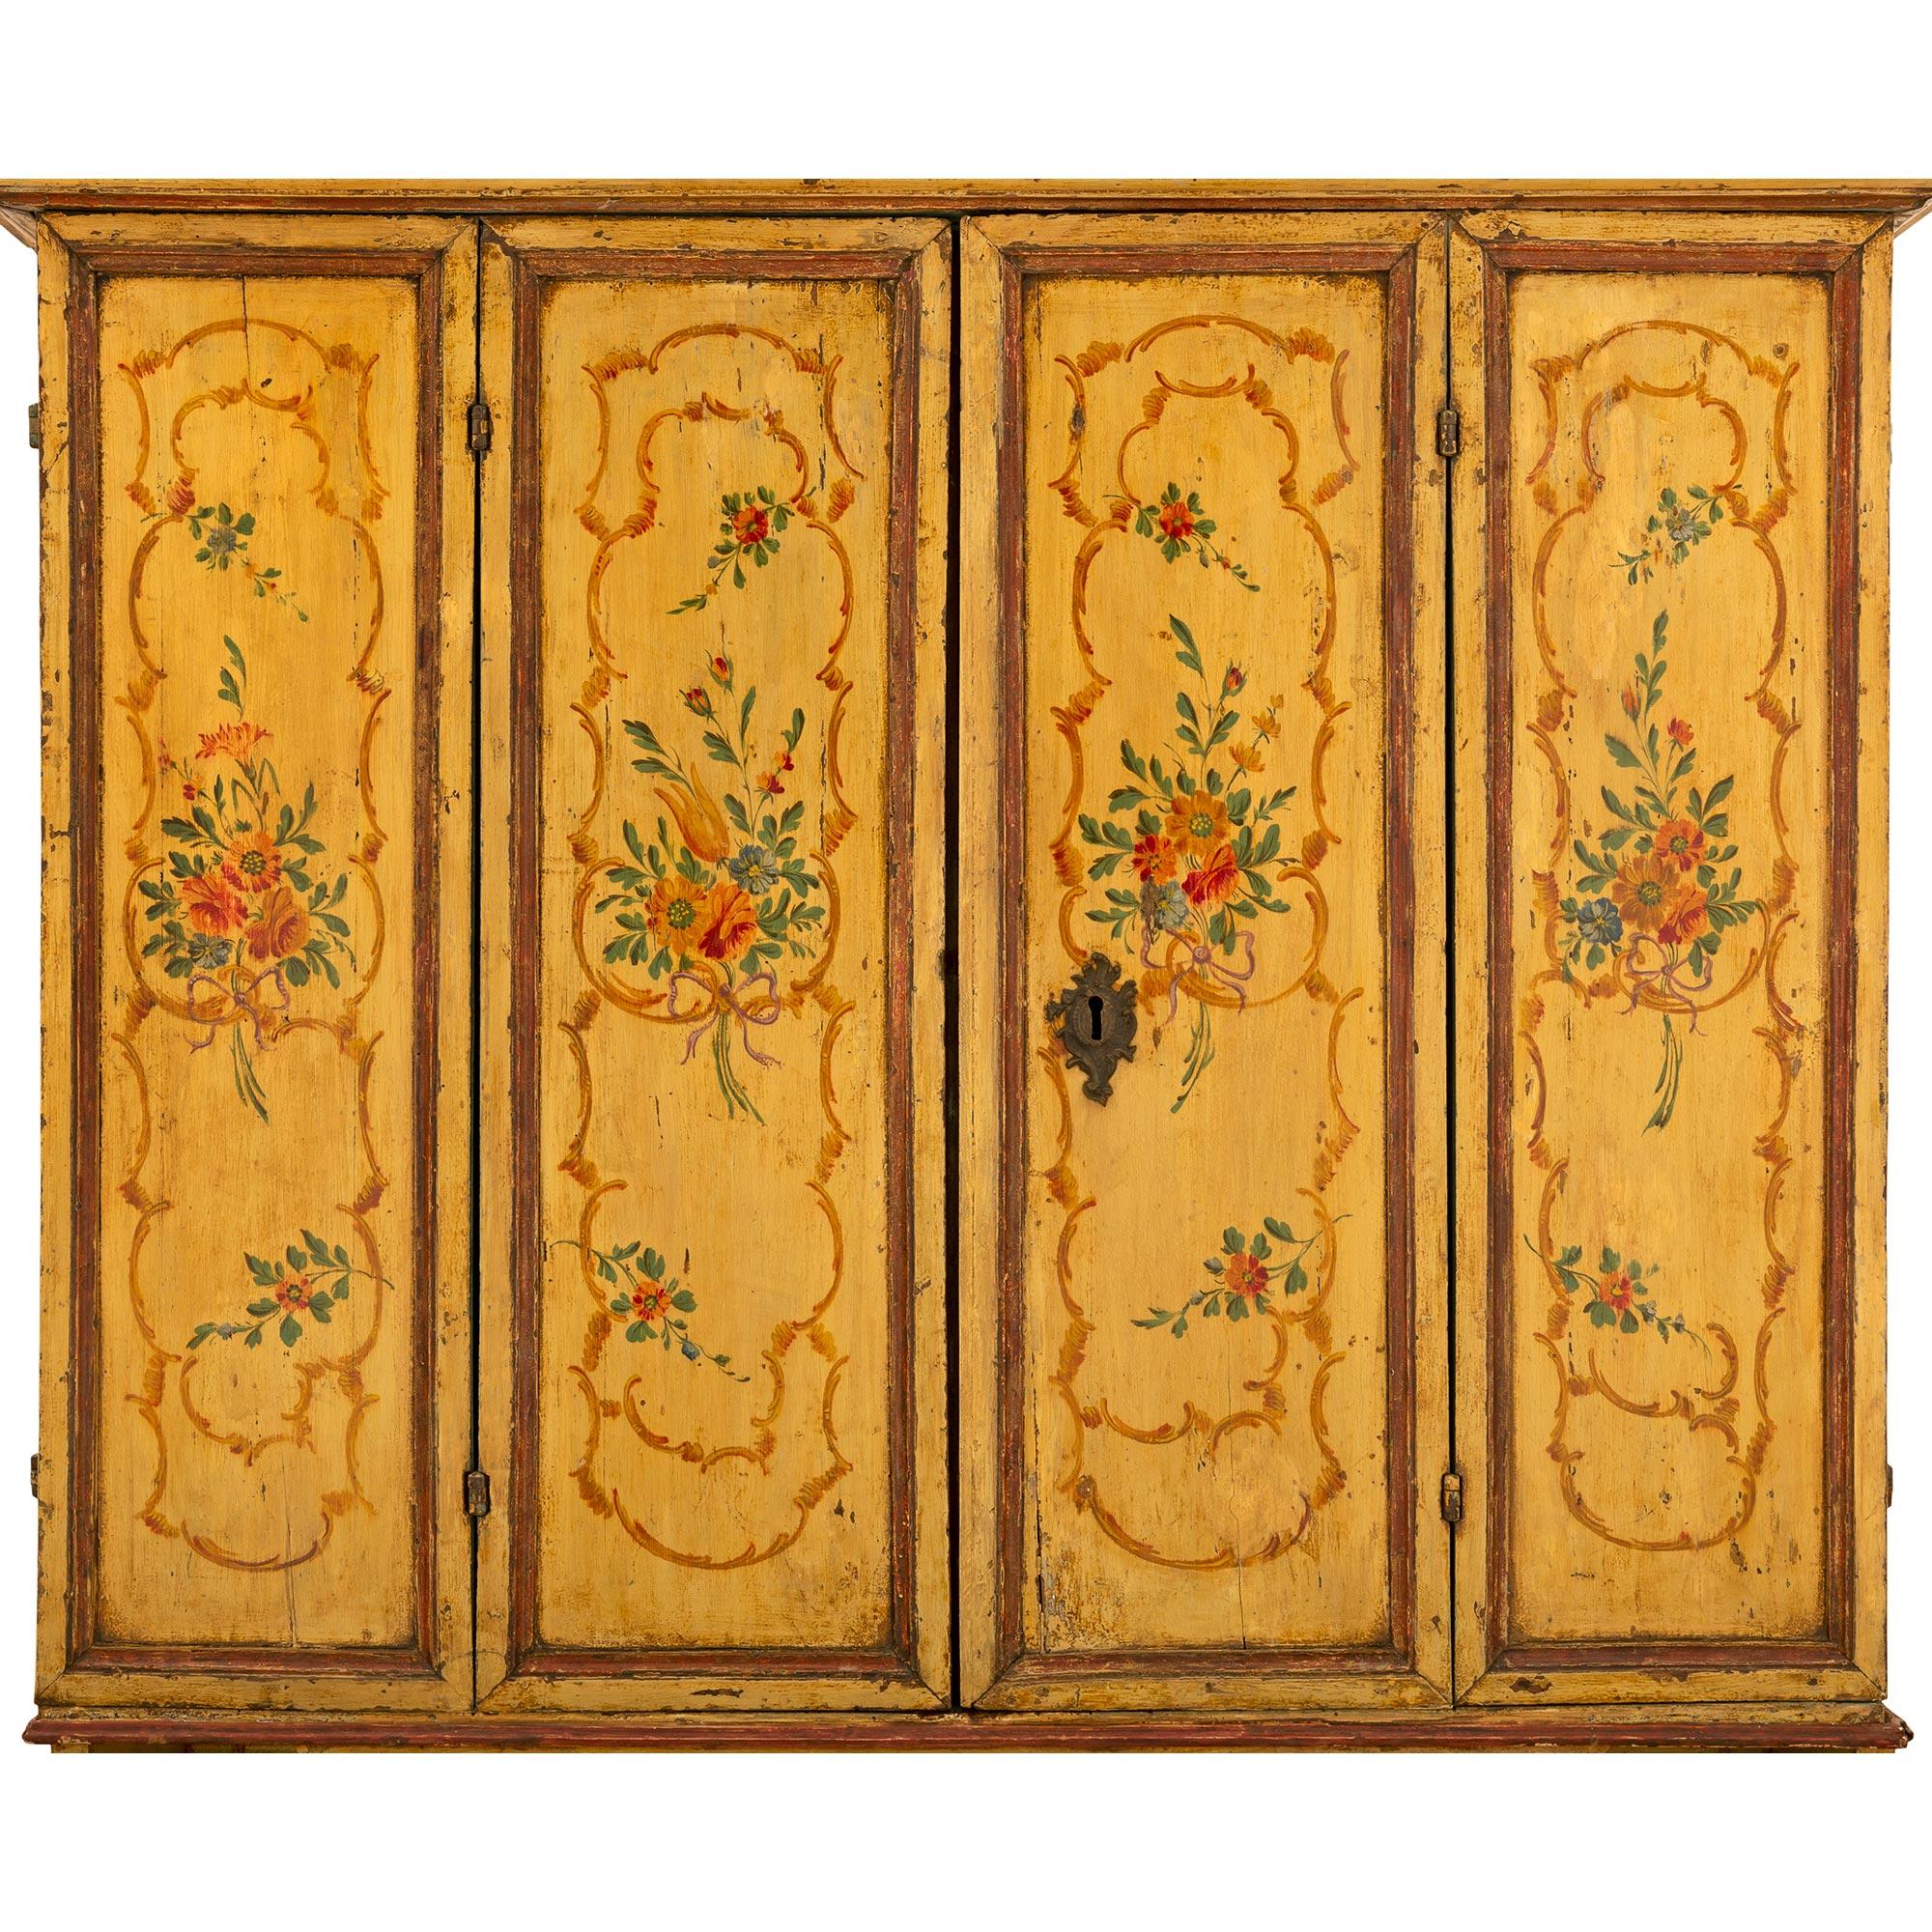 Italian Mid-18th Century Genovese St. Hand Painted Cabinet / Desk For Sale 2